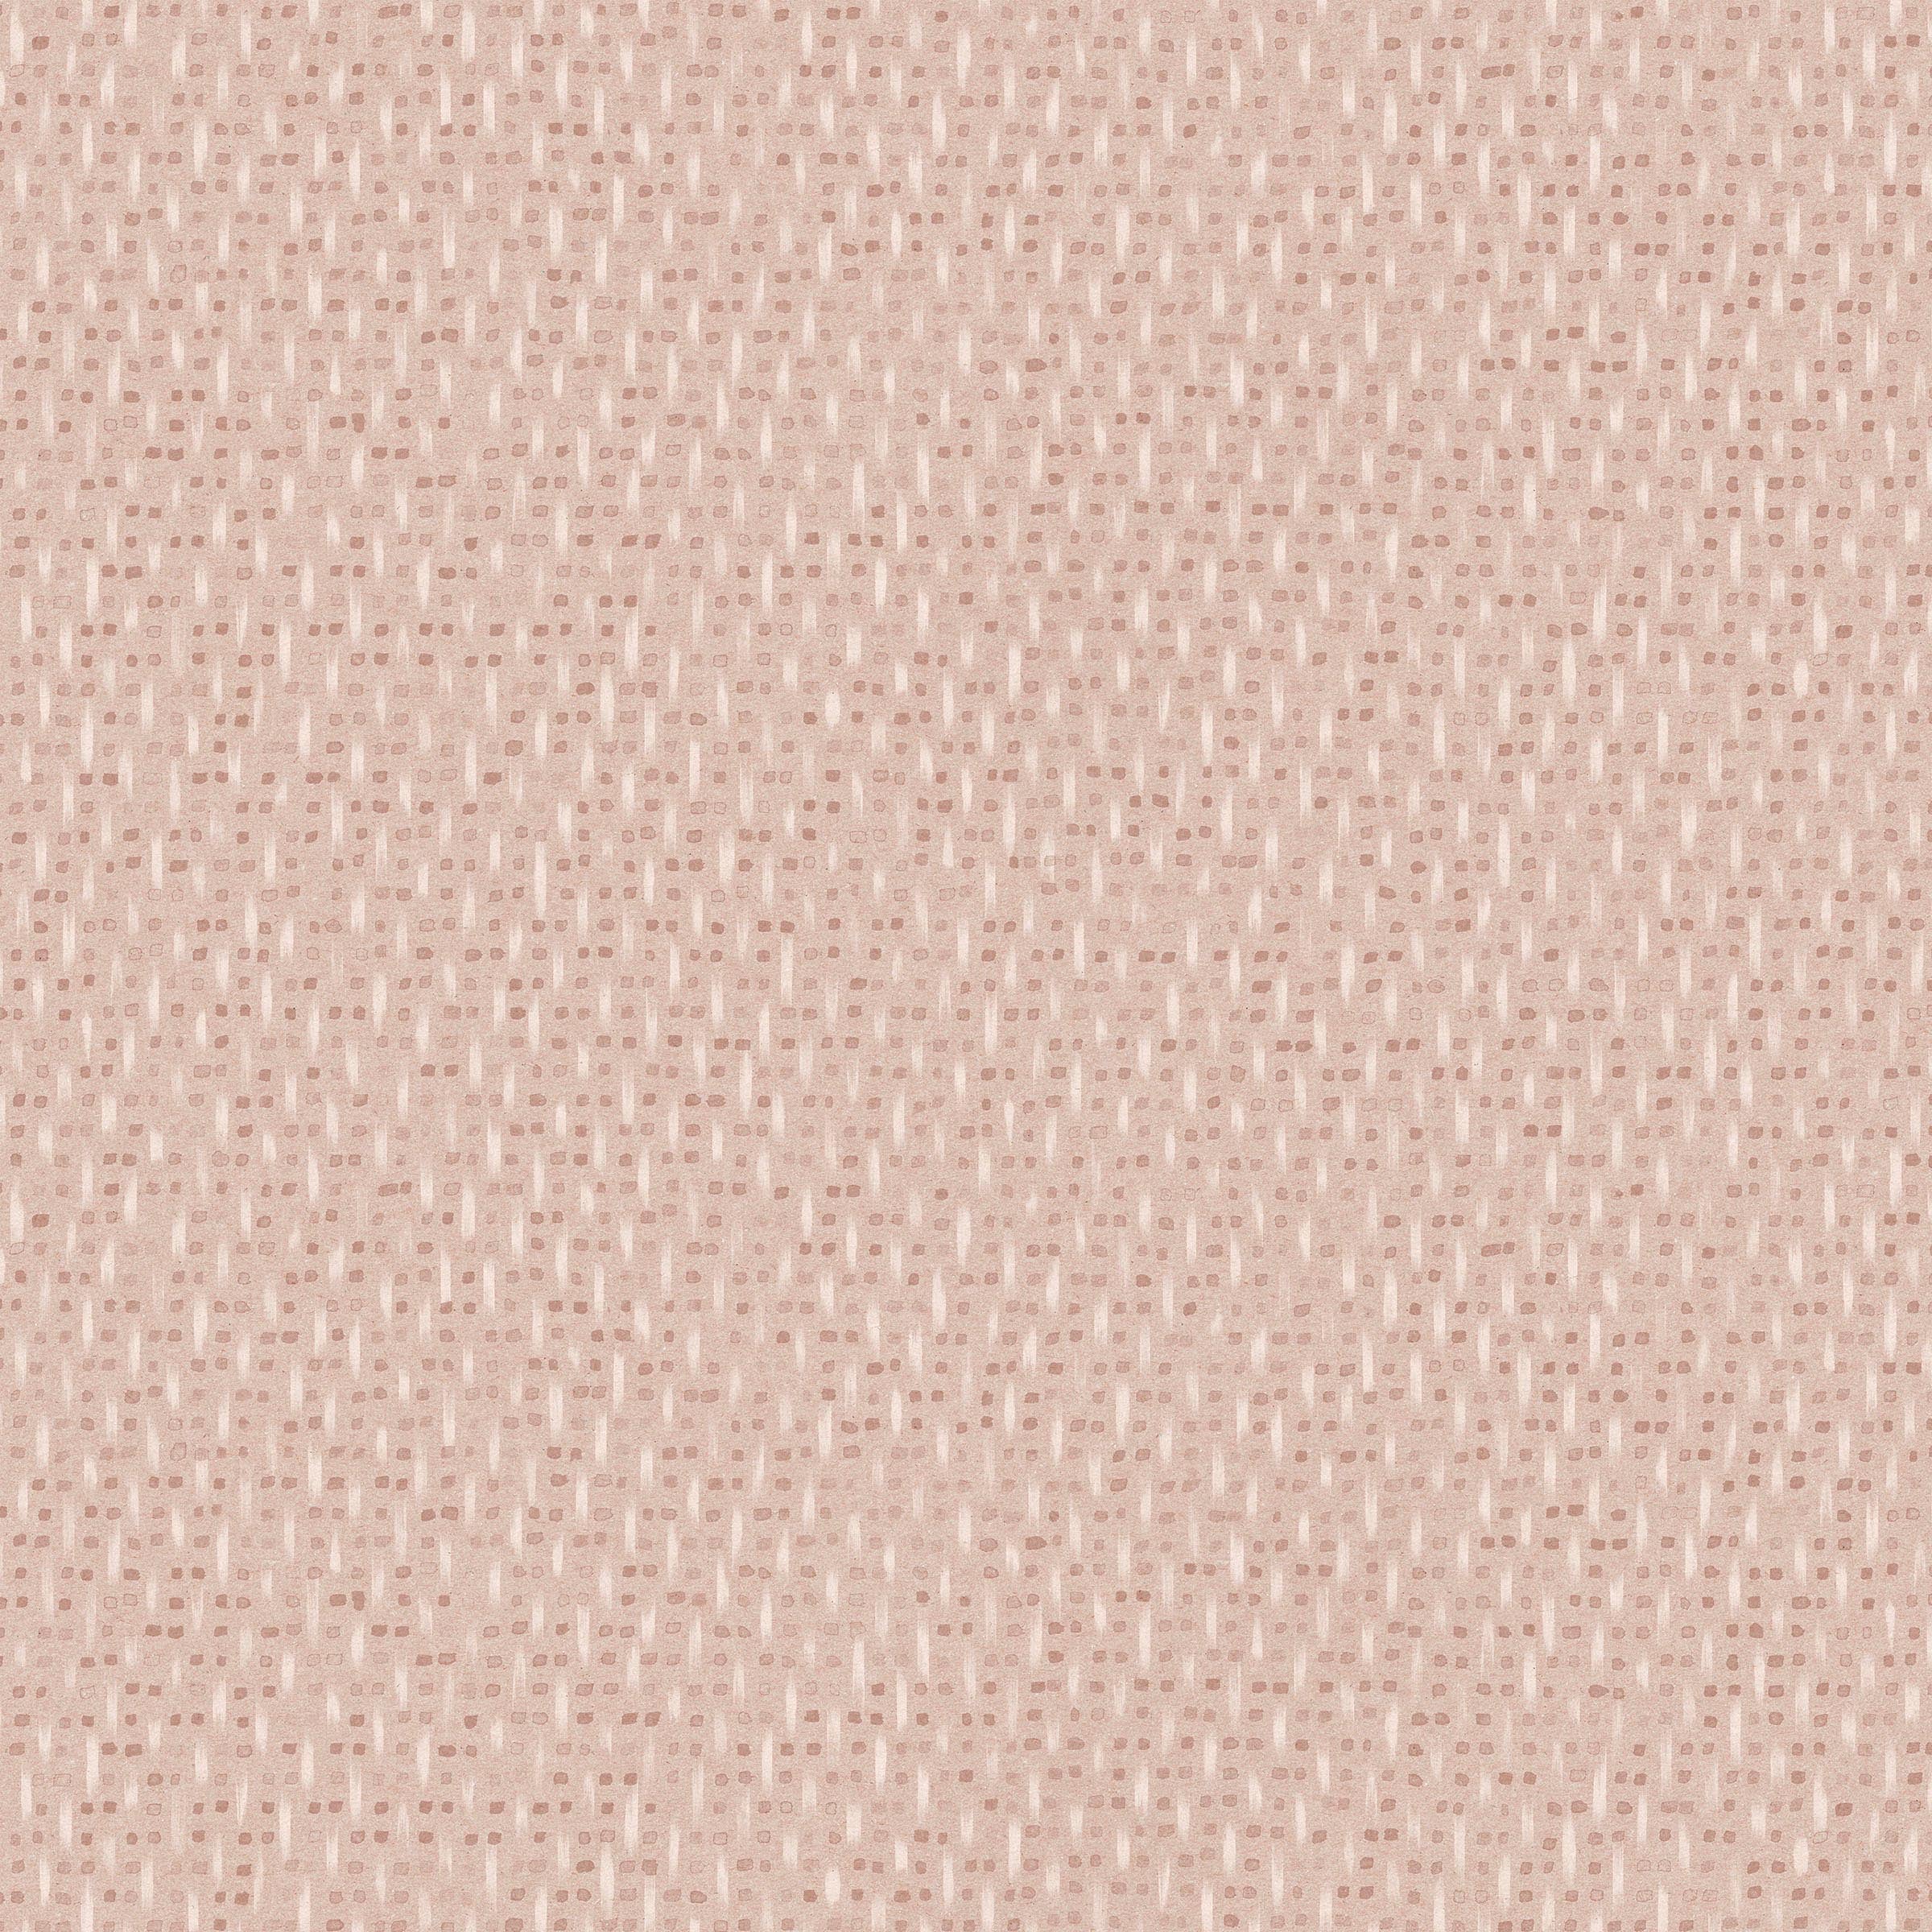 Detail of fabric in a small-scale dot and dash pattern in shades of cream and pink on a light pink field.